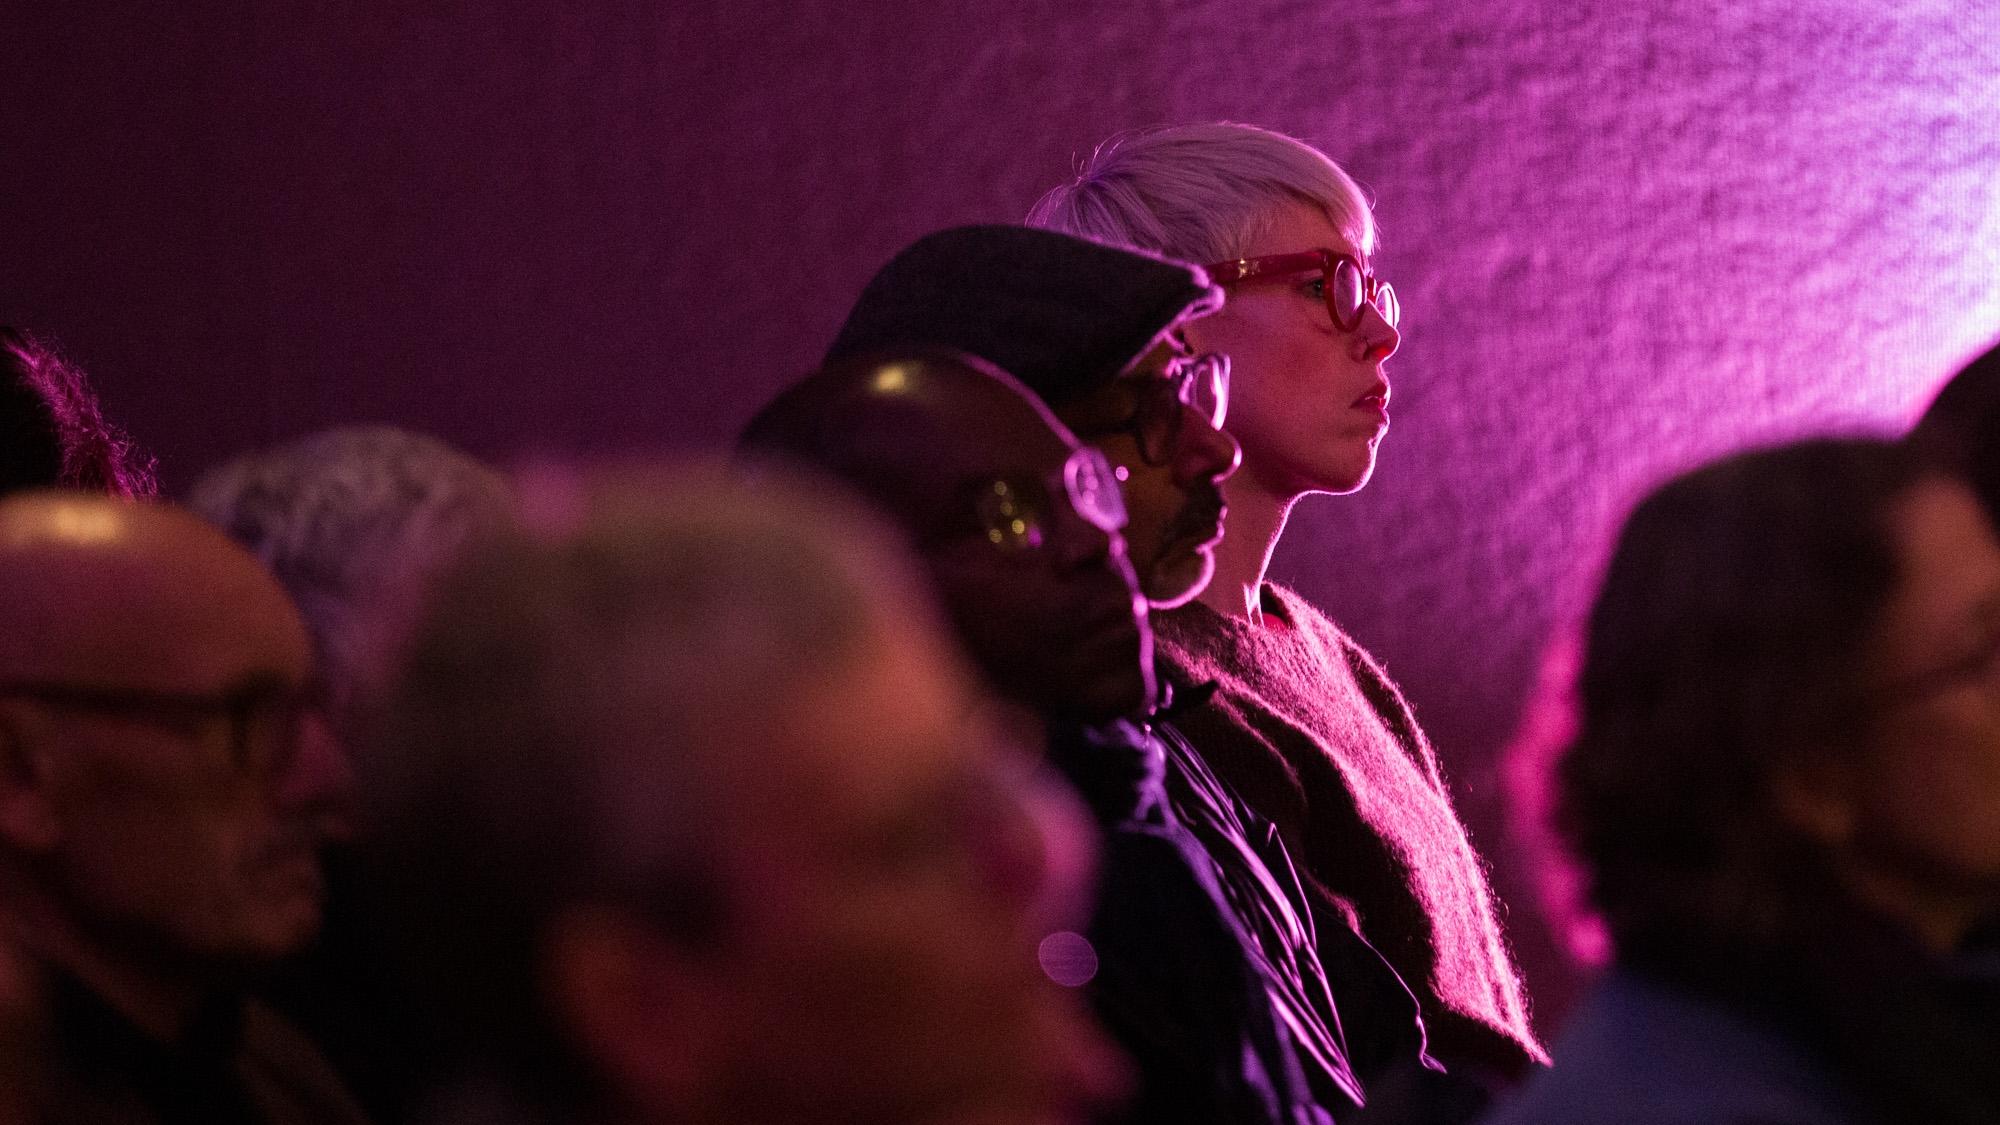 An audience bathed in purple light